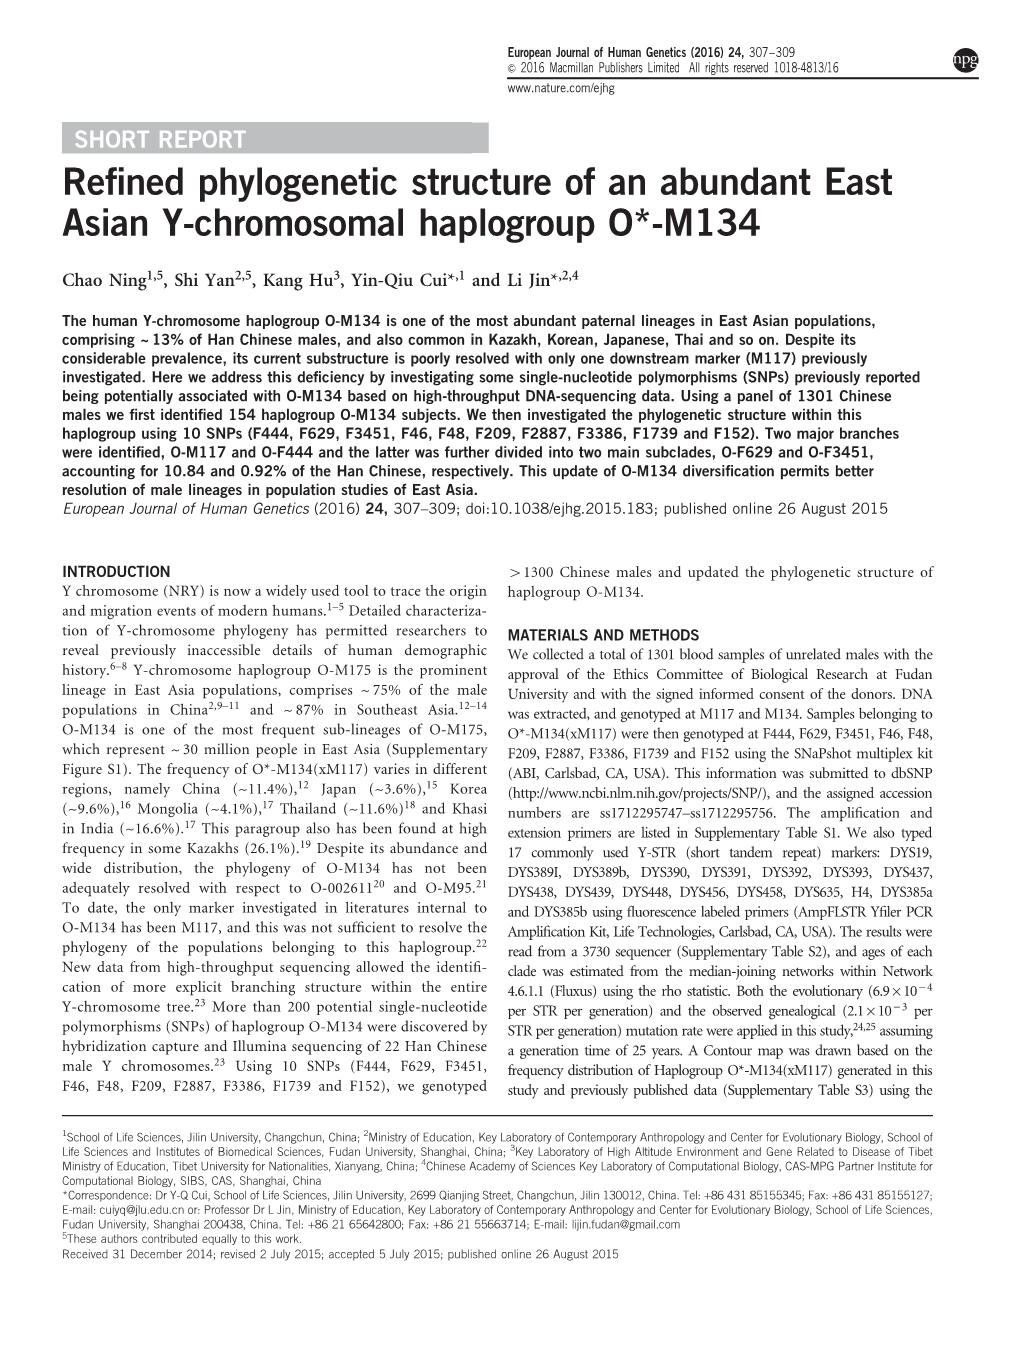 Refined Phylogenetic Structure of an Abundant East Asian Y